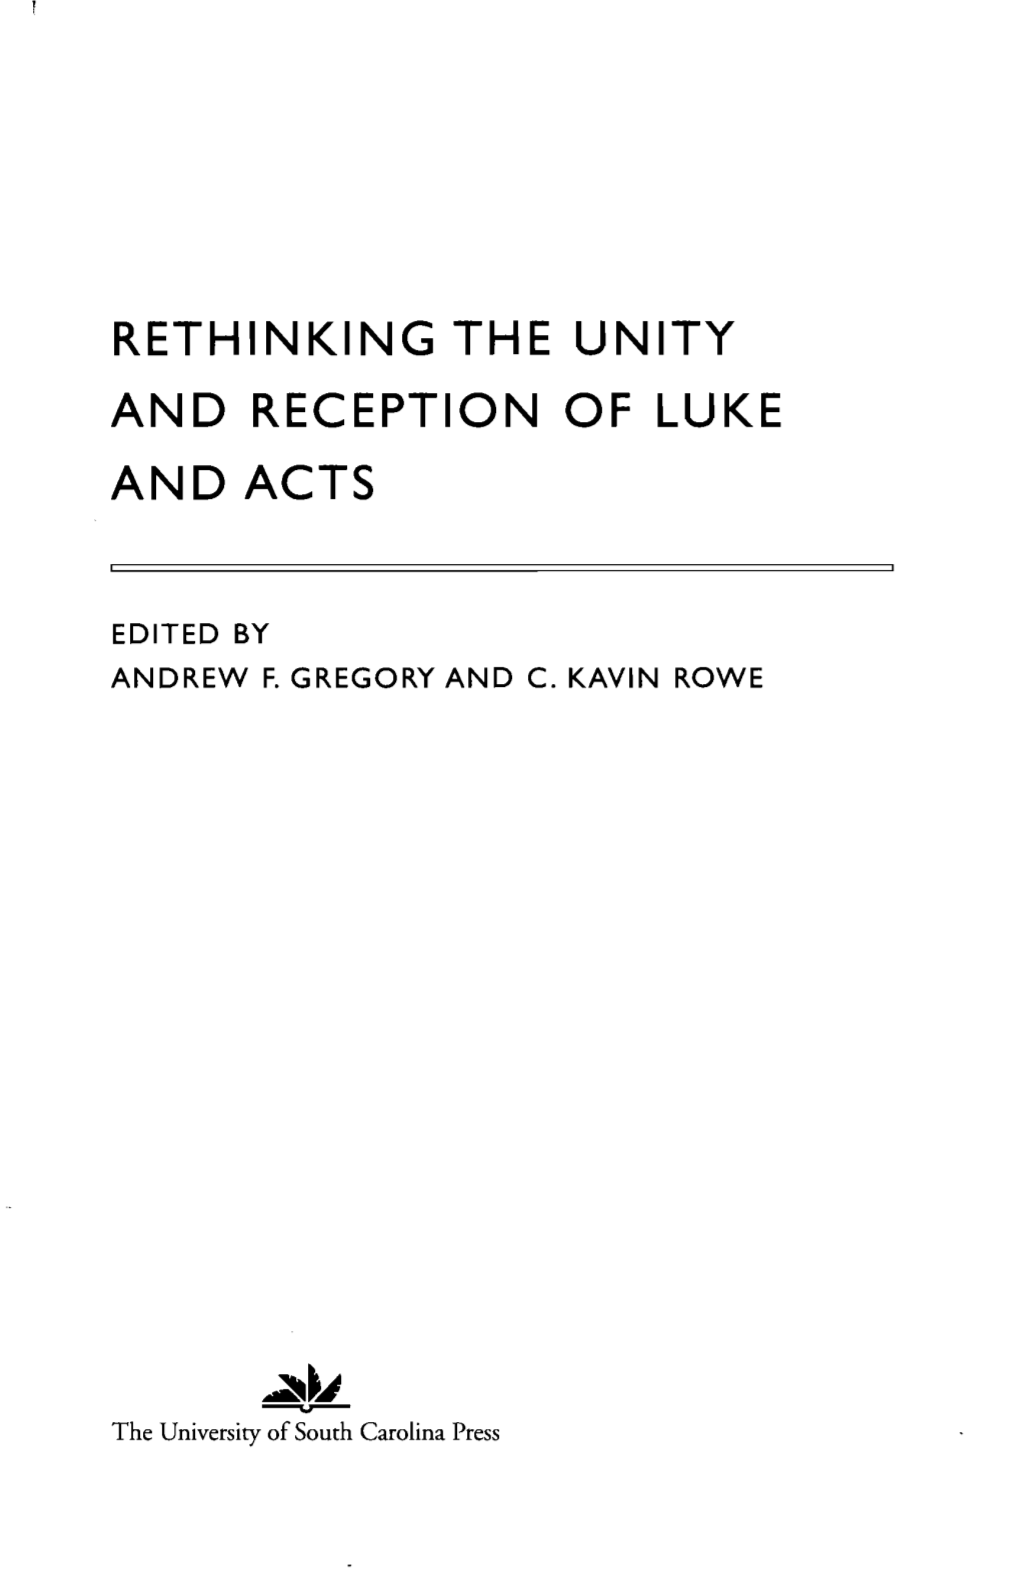 Rethinking the Unity and Reception of Luke and Acts